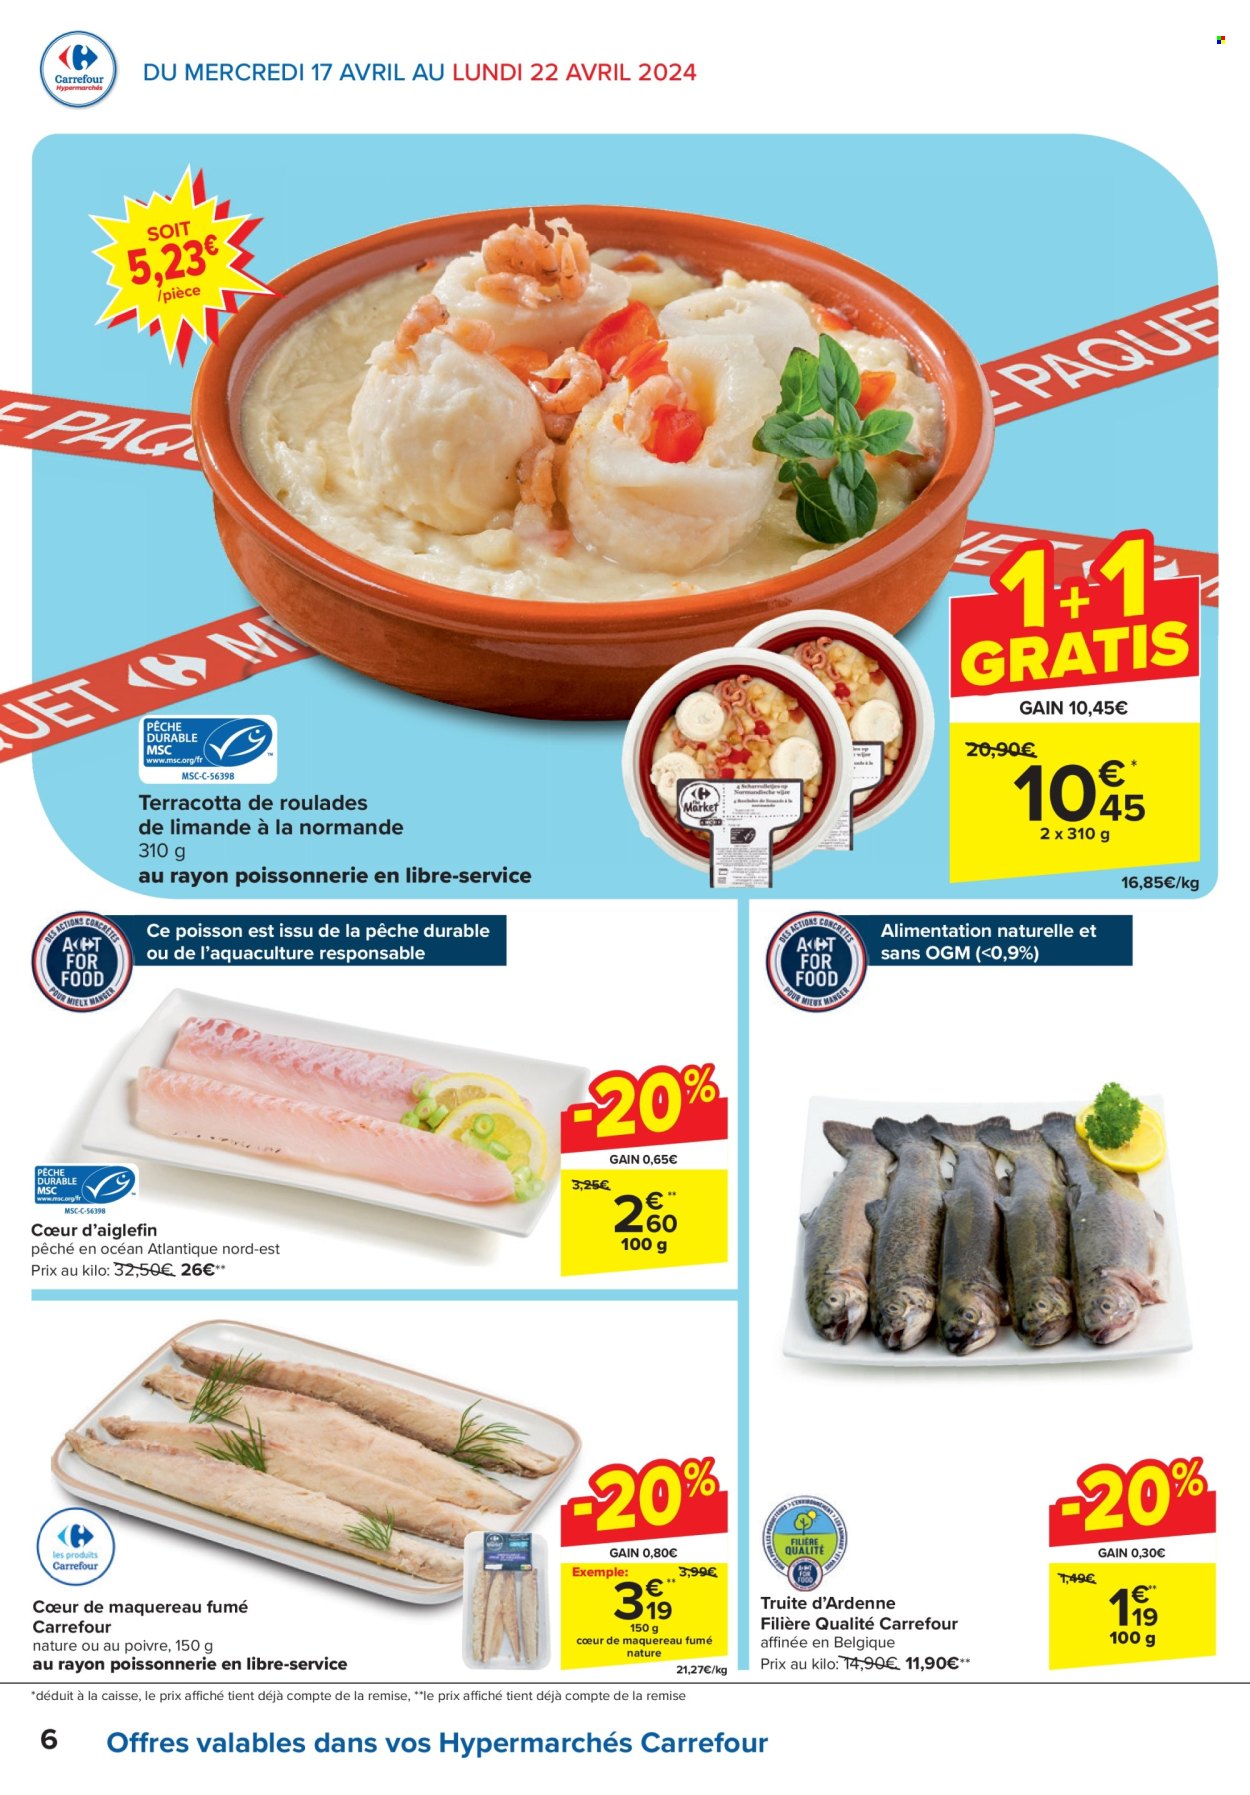 Catalogue Carrefour hypermarkt - 17.4.2024 - 29.4.2024. Page 6.